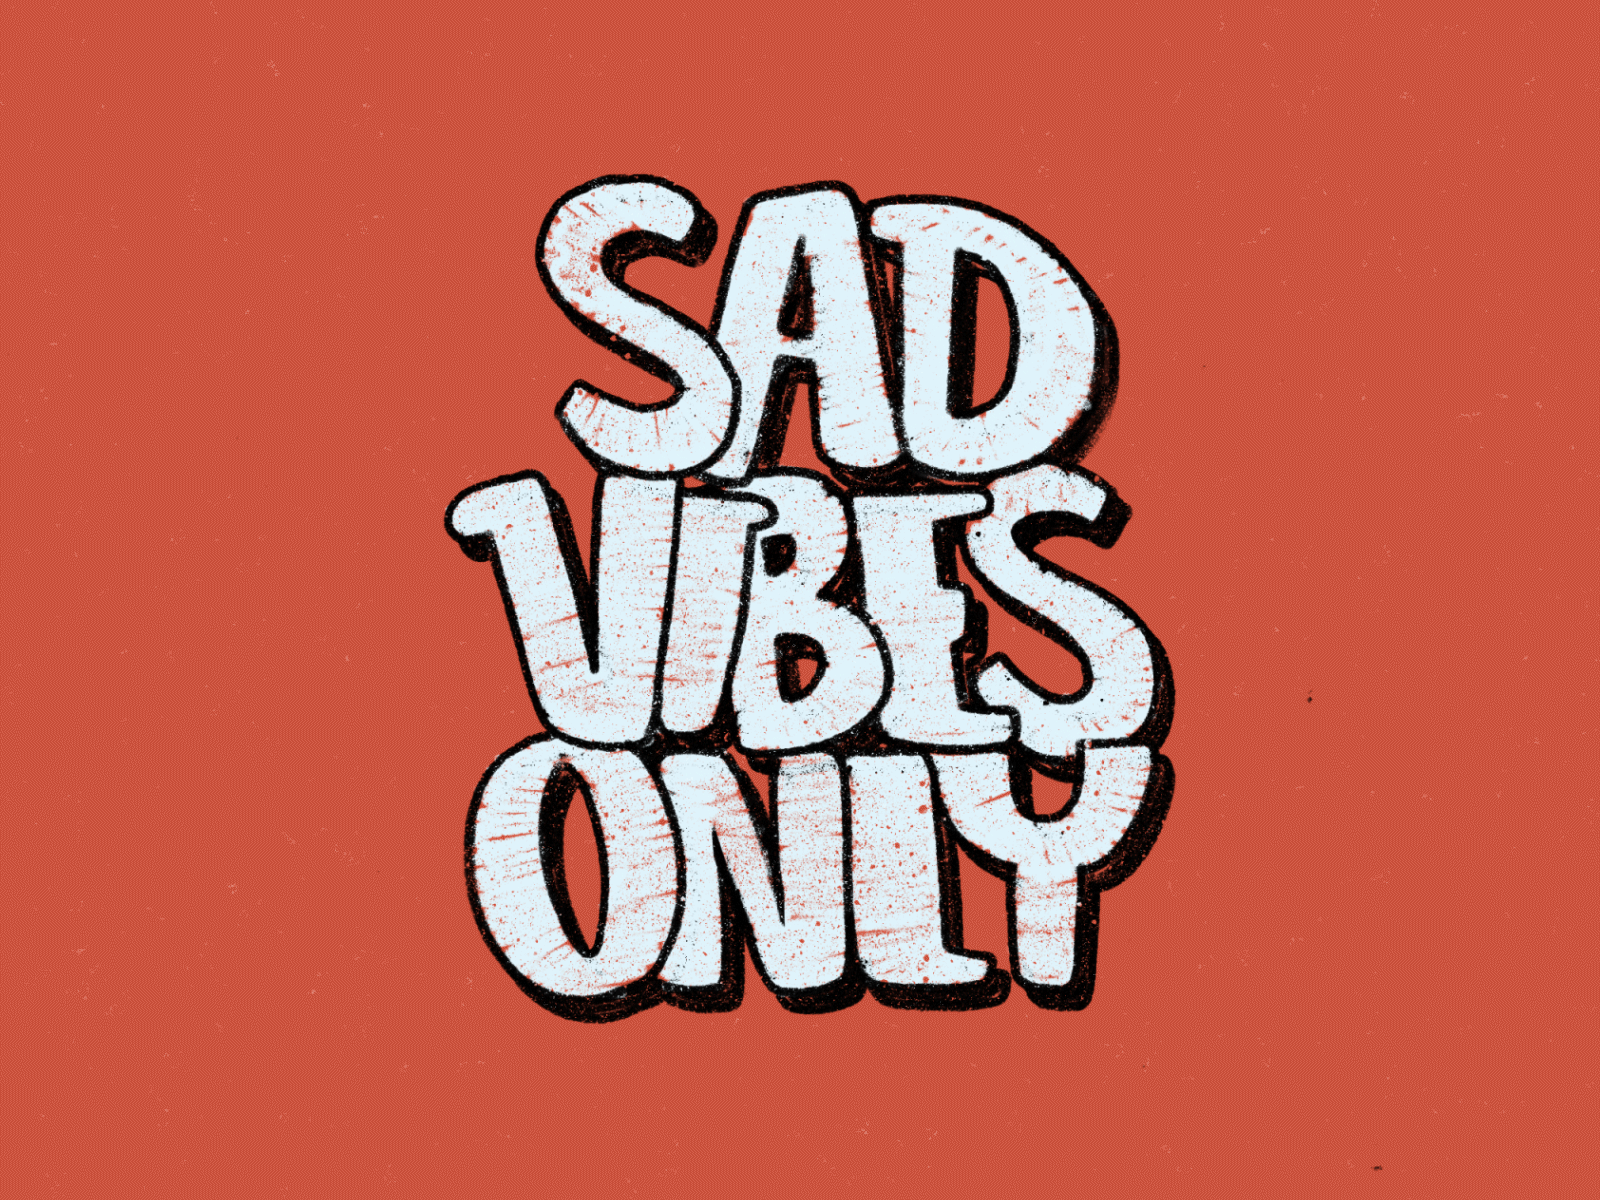 Download sad vibes wallpapers Free for Android  sad vibes wallpapers APK  Download  STEPrimocom